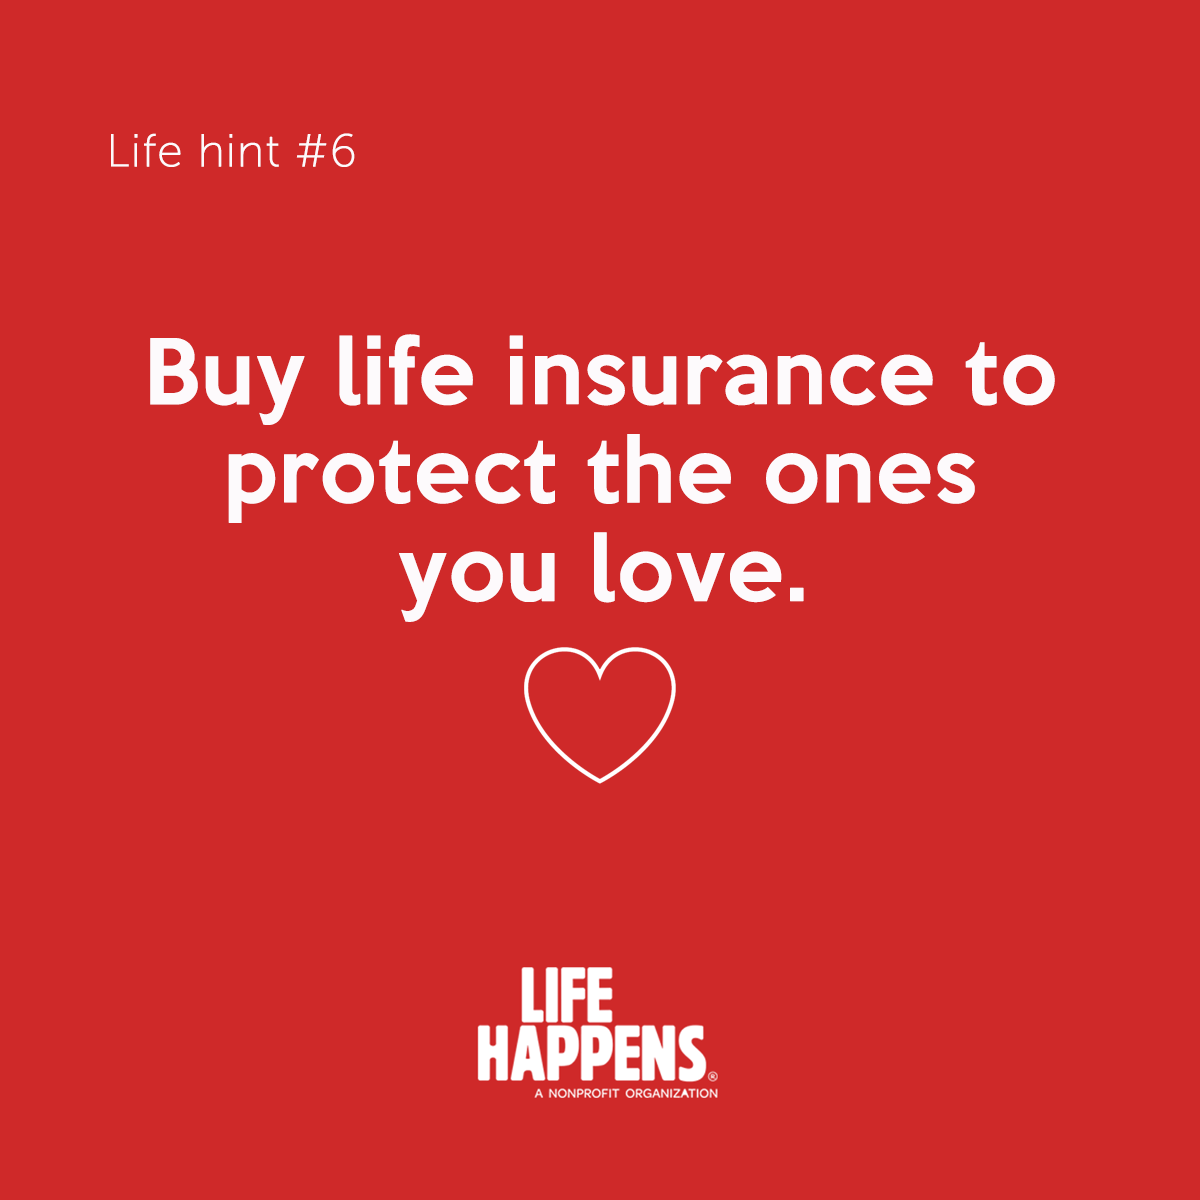 graphic_IG_1200x1200_life_hint_6_protect_branded